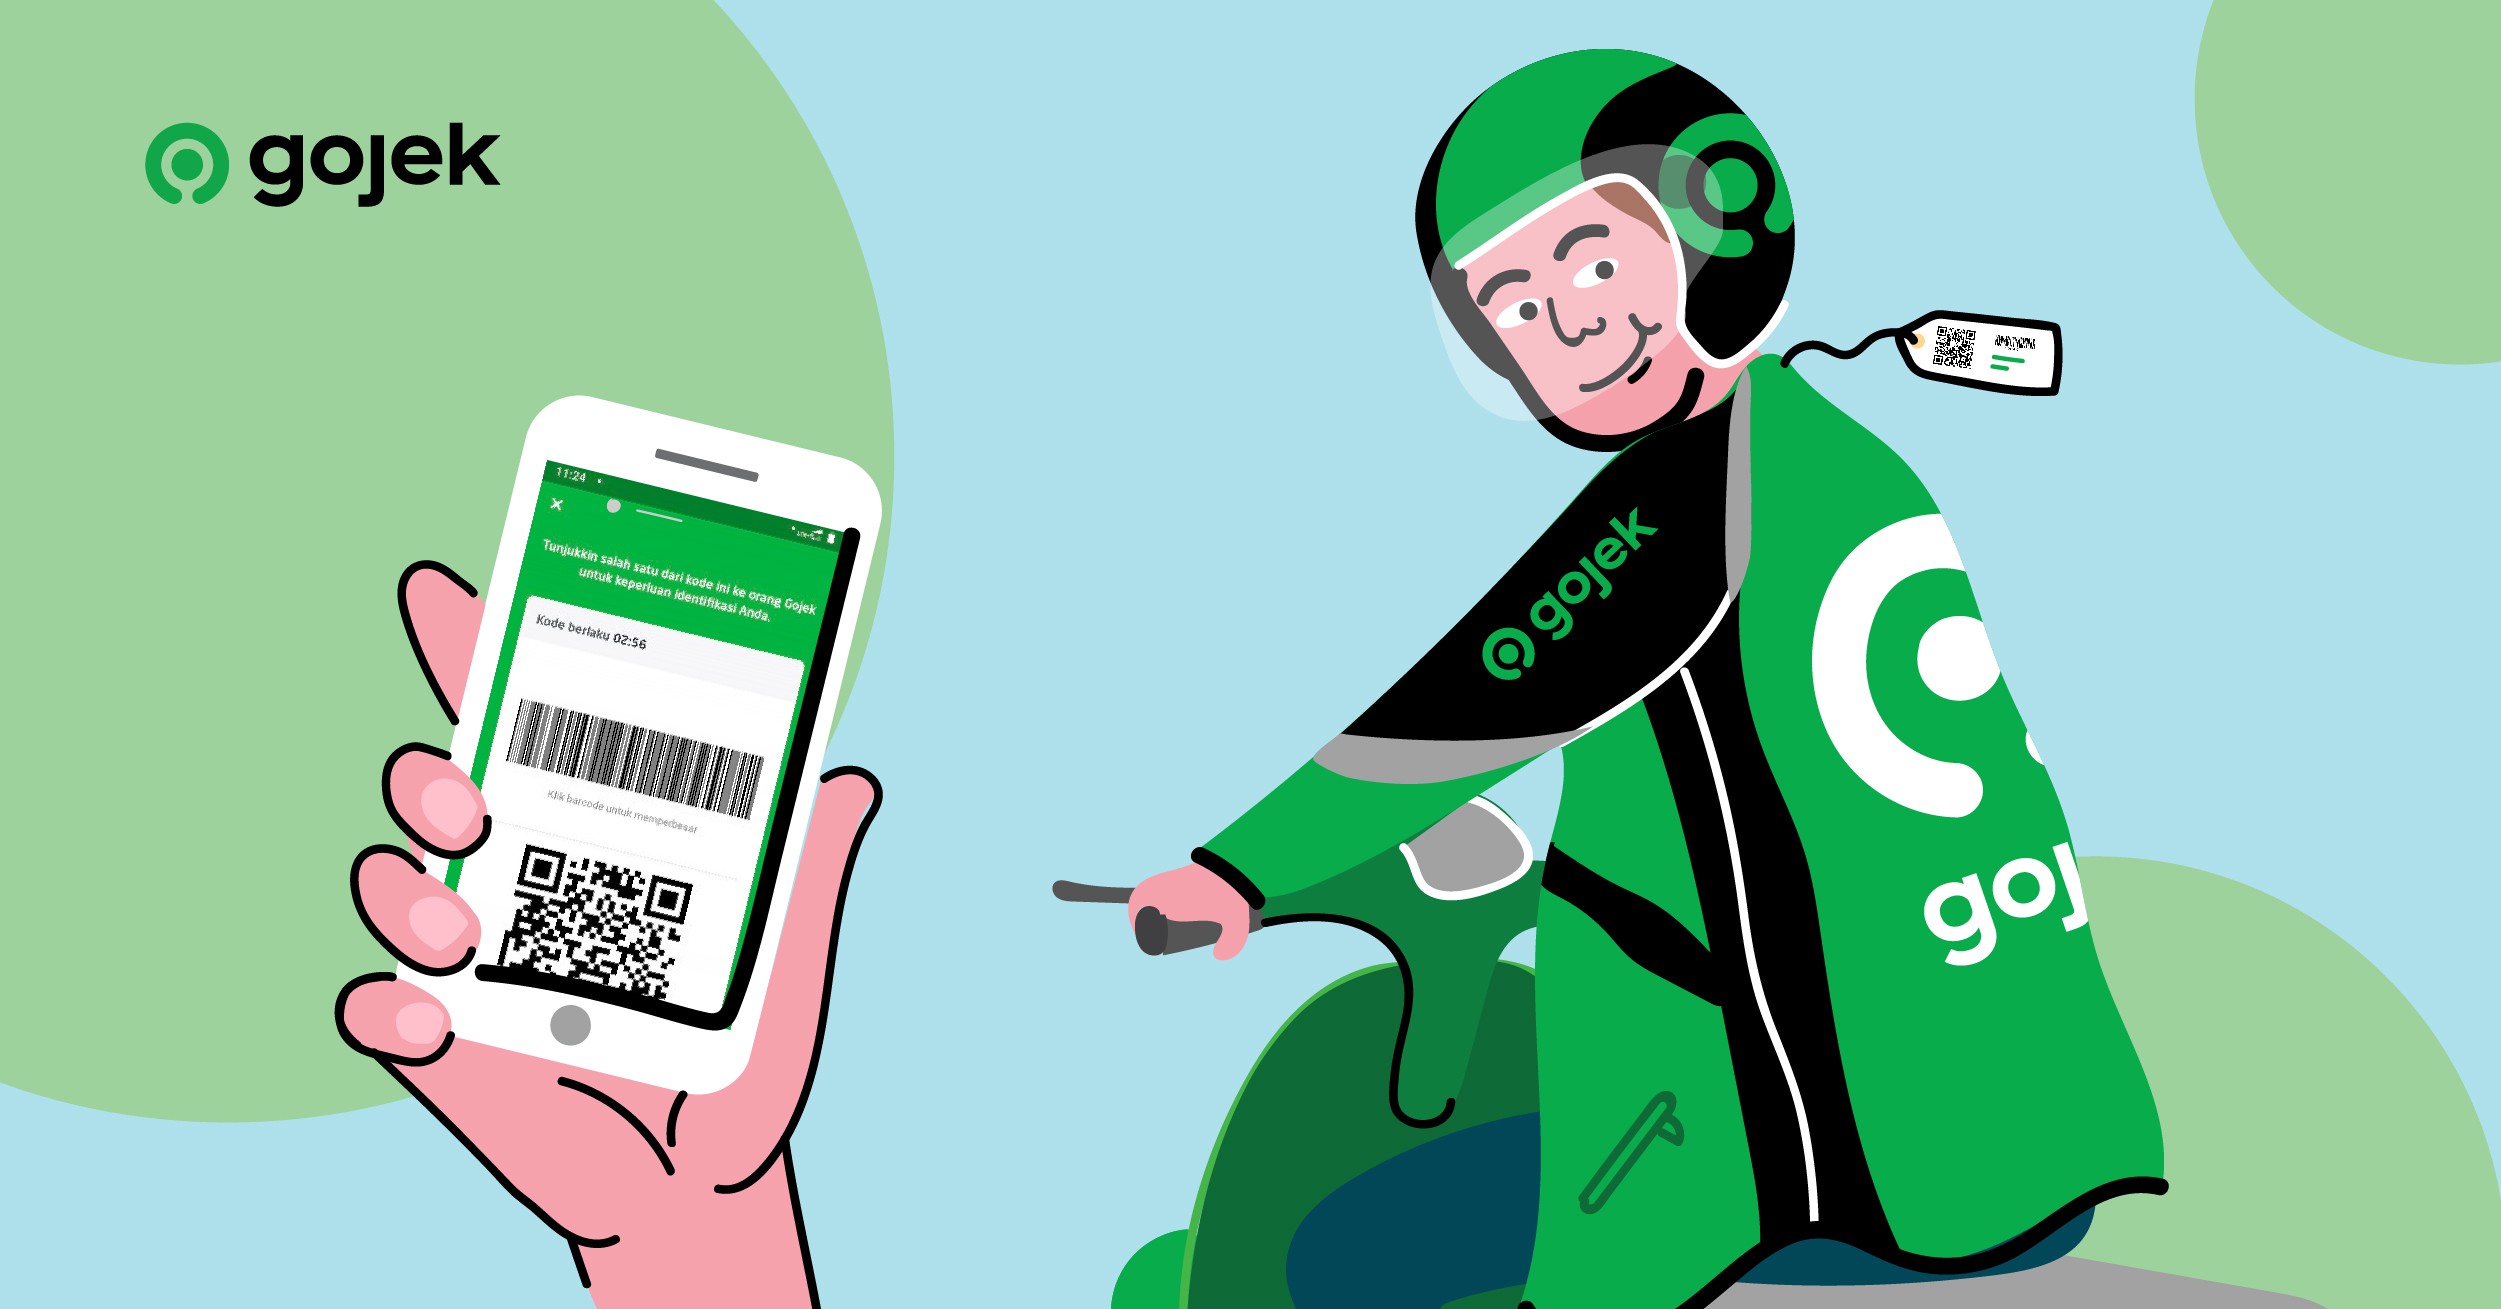 Gojek Promo Code: Get 50% OFF On Your First Ride - wide 5